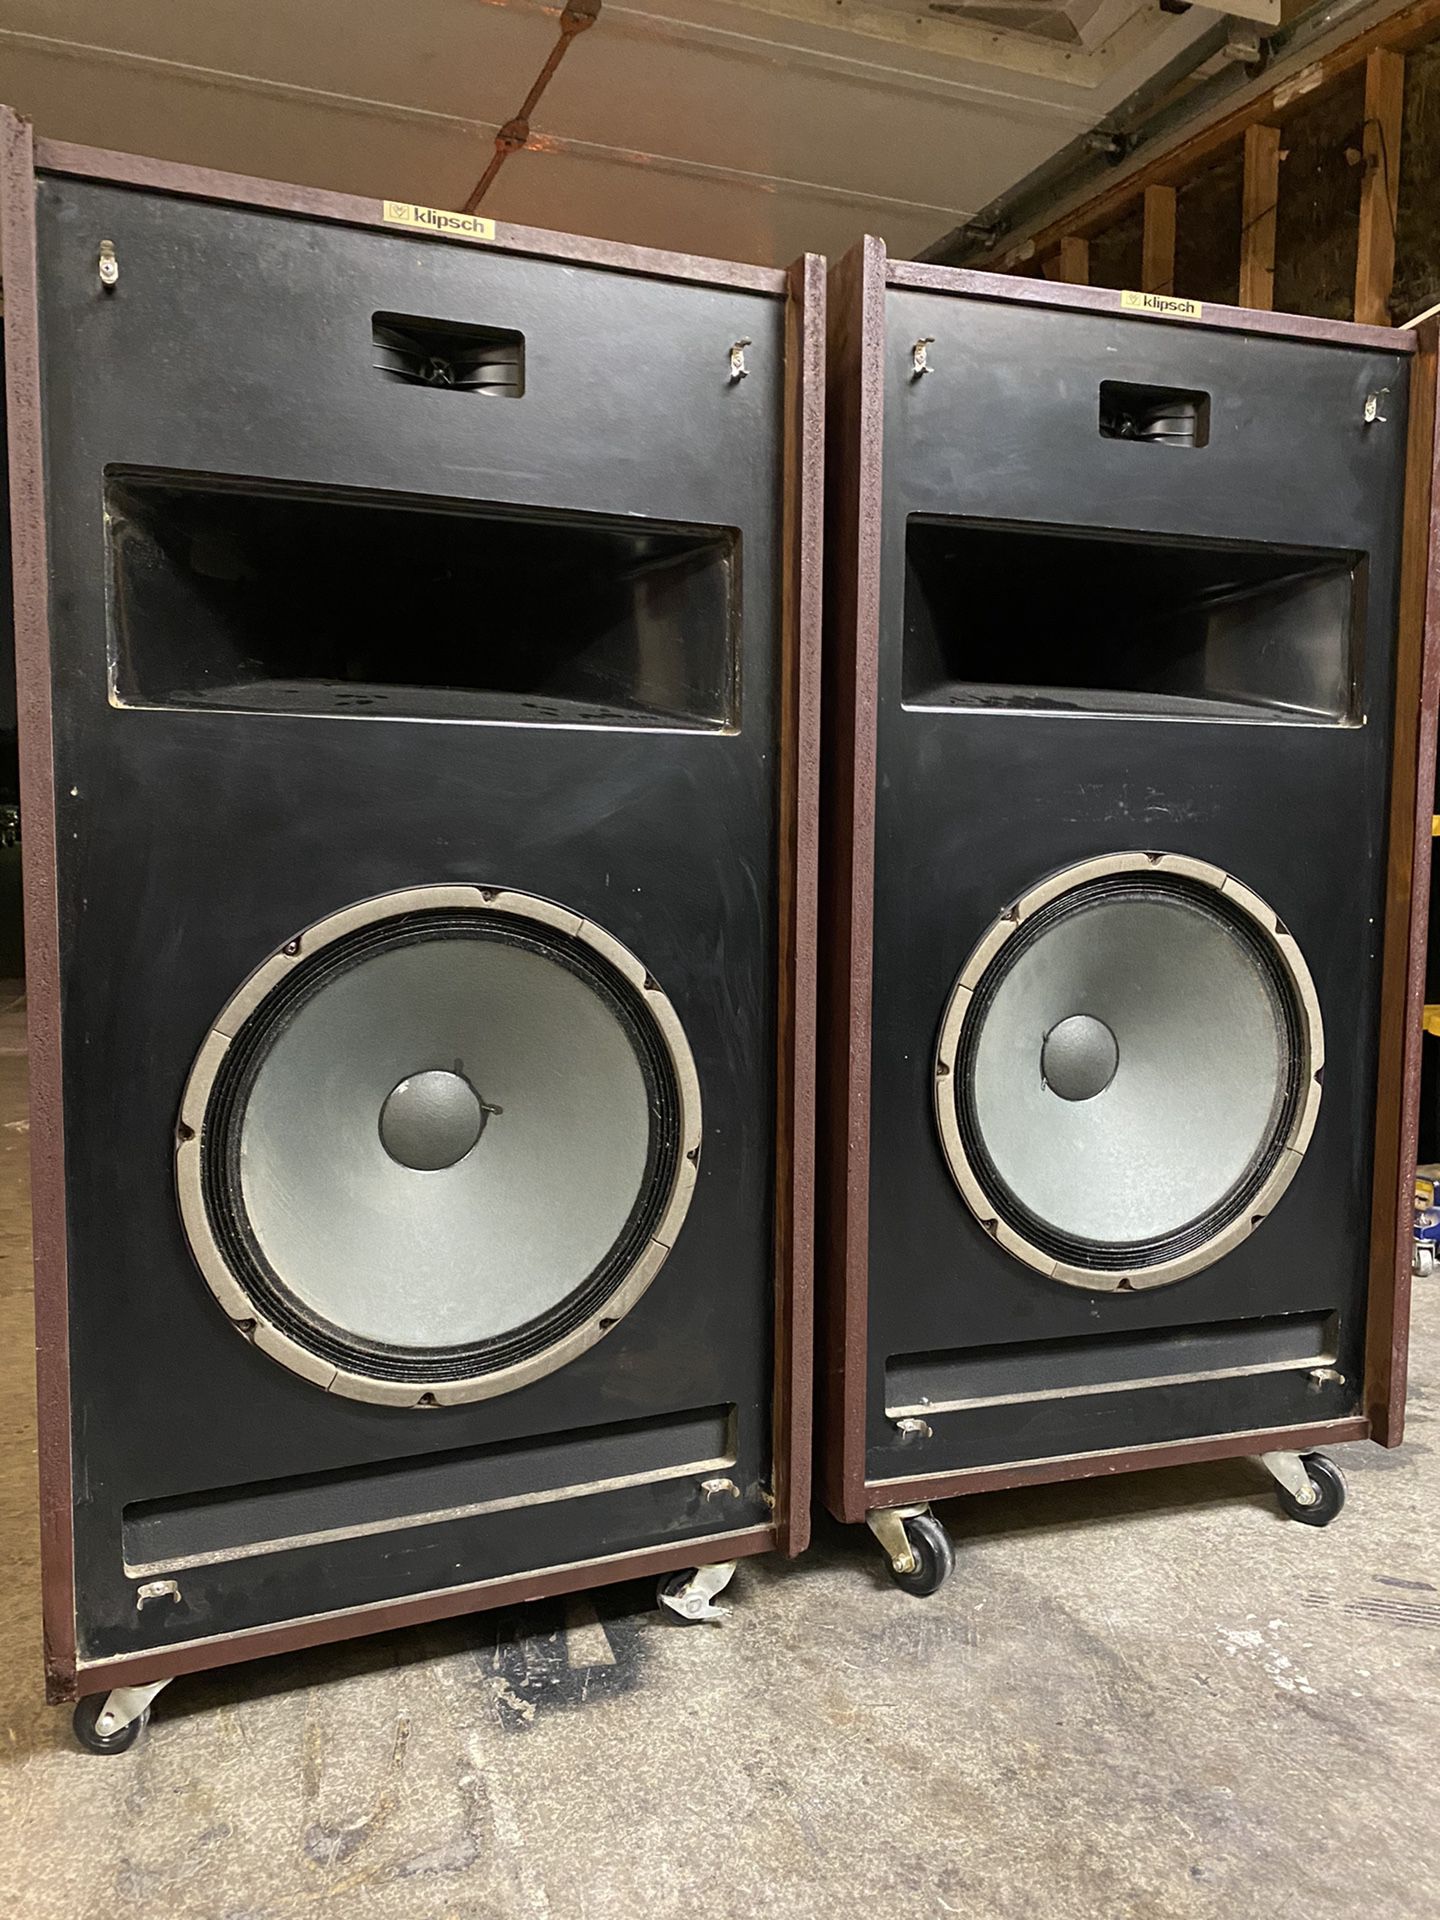 EPIC HORN LOADED KLIPSCH SPEAKERS **PAIR VINTAGE** ORIGINAL BROCHURE AND SALES RECEIPT**IF AD IS UP ITS STILL AVAILABLE**FIRM**